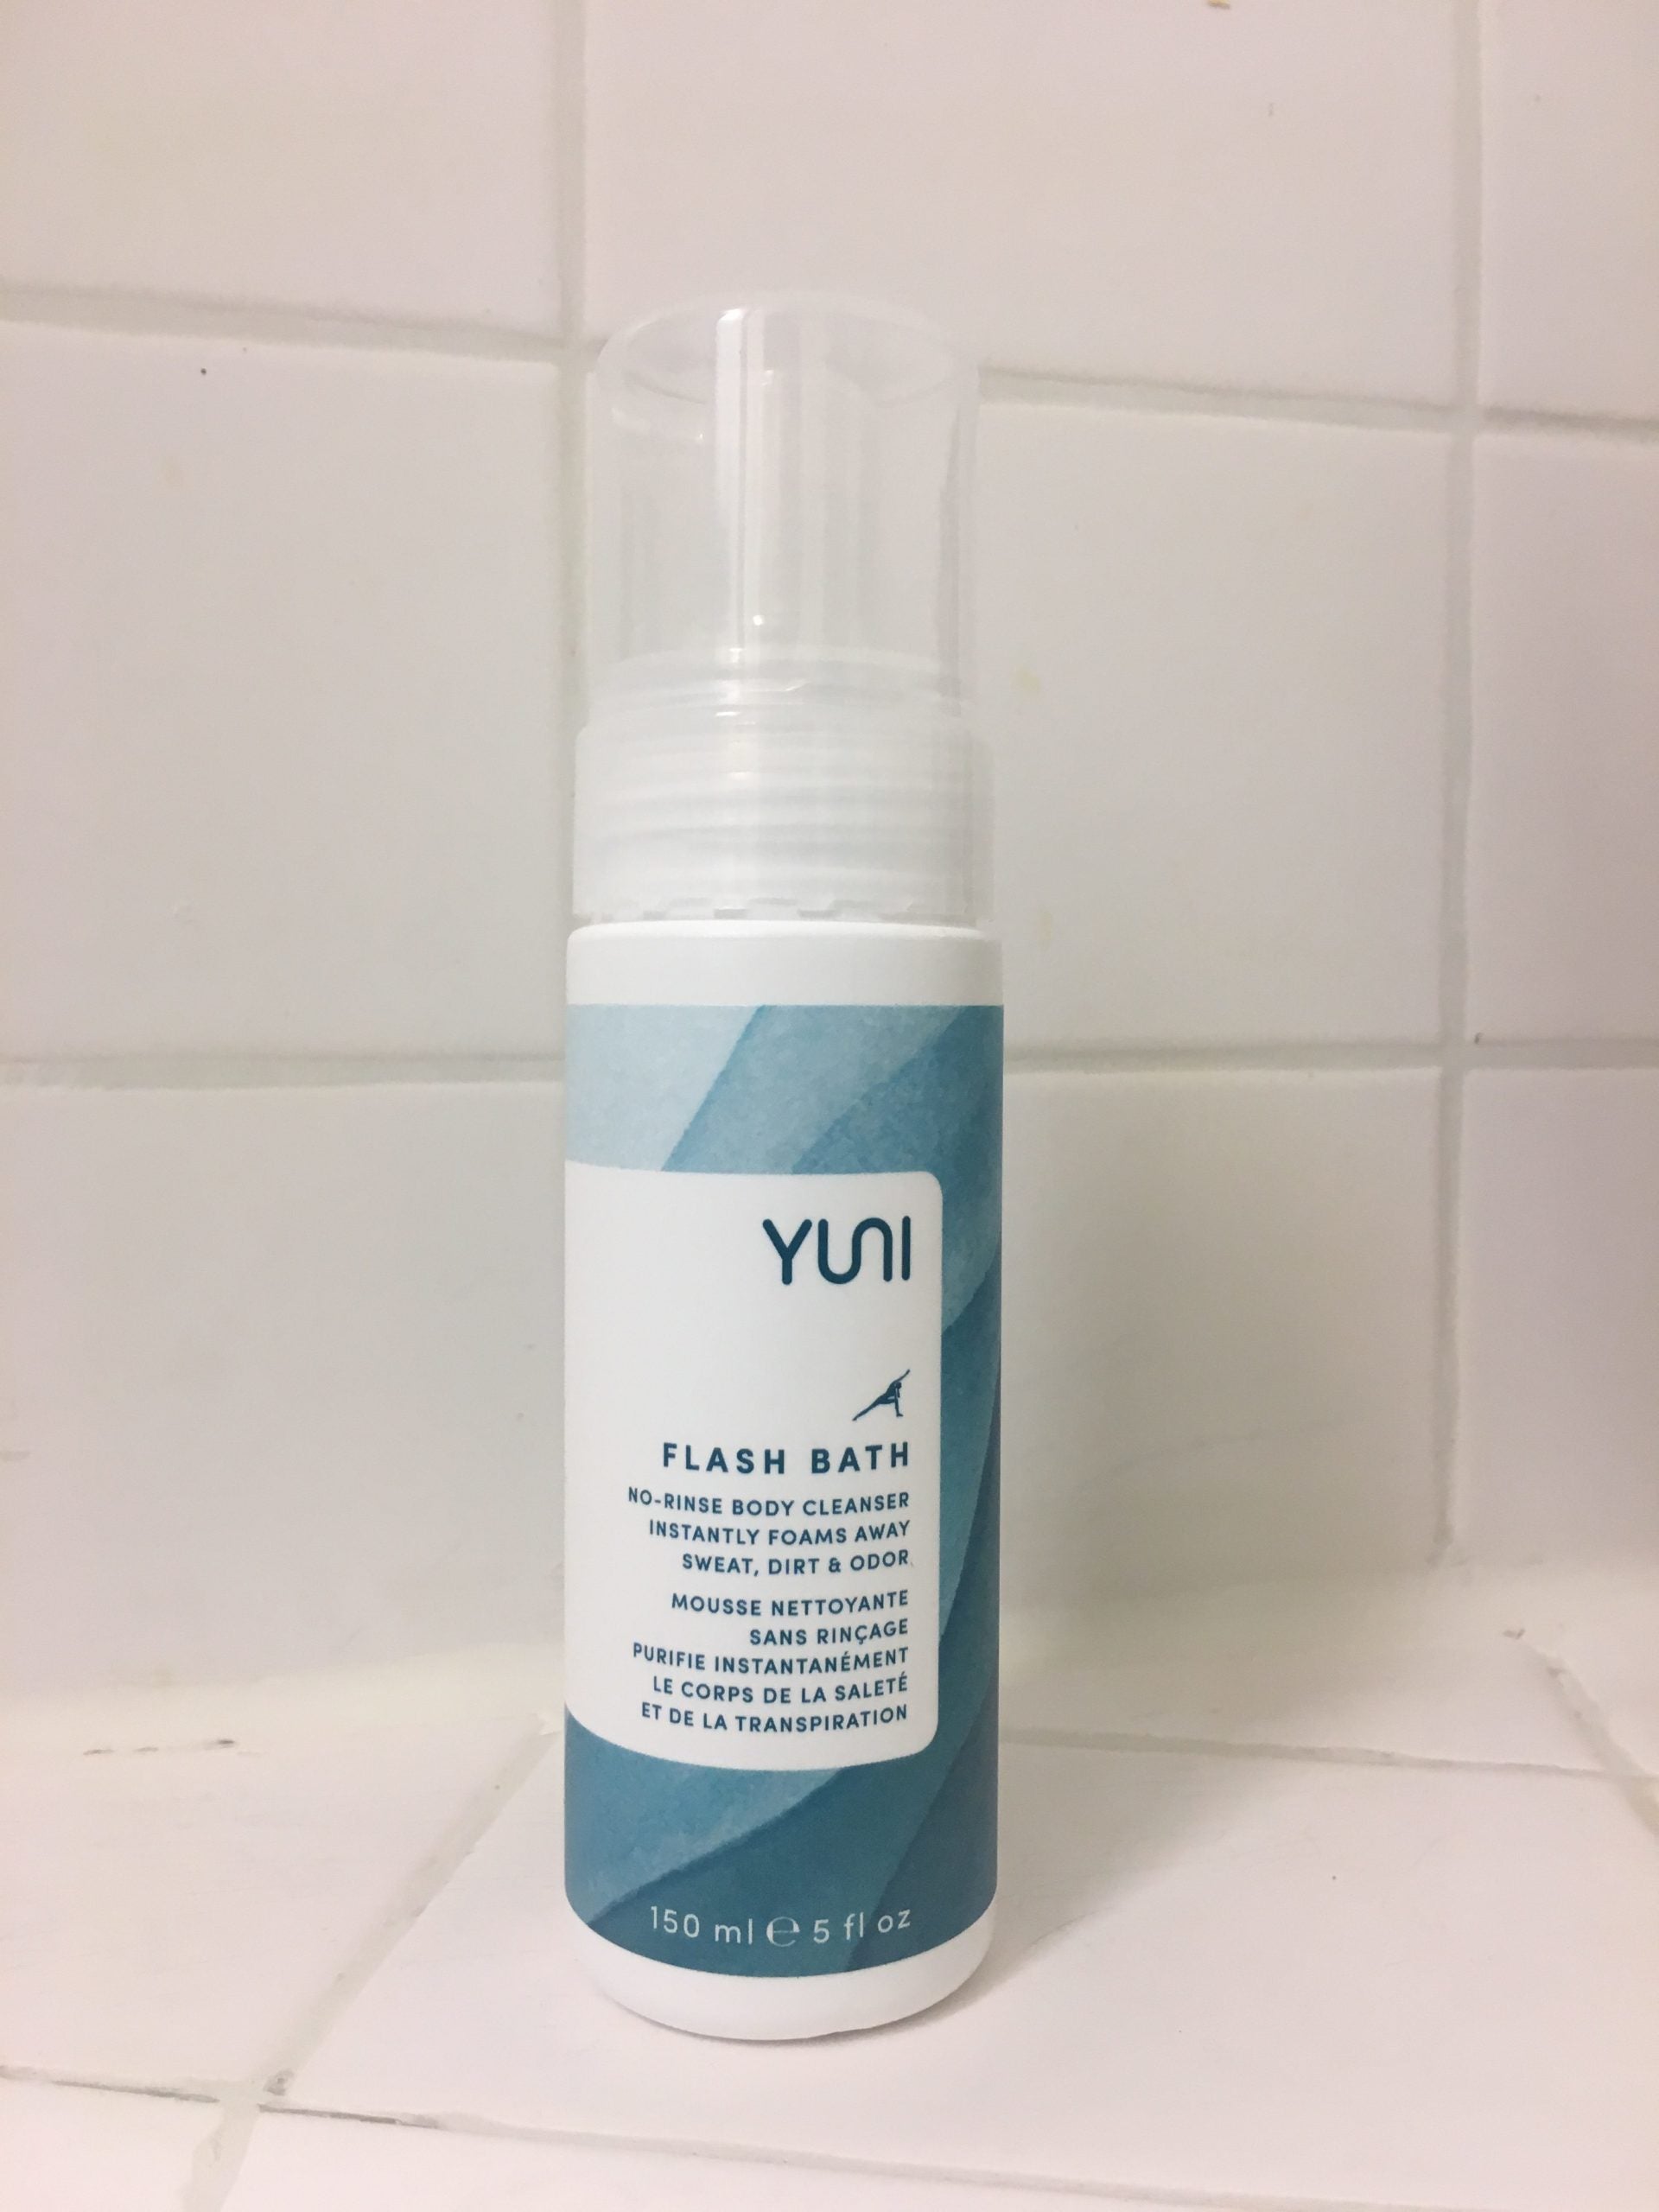 Review, Ingredients, Photos, Swatches, Skincare Trend 2018, 2019: Yuni Flash Bath No-Rinse Body Cleansing Foam